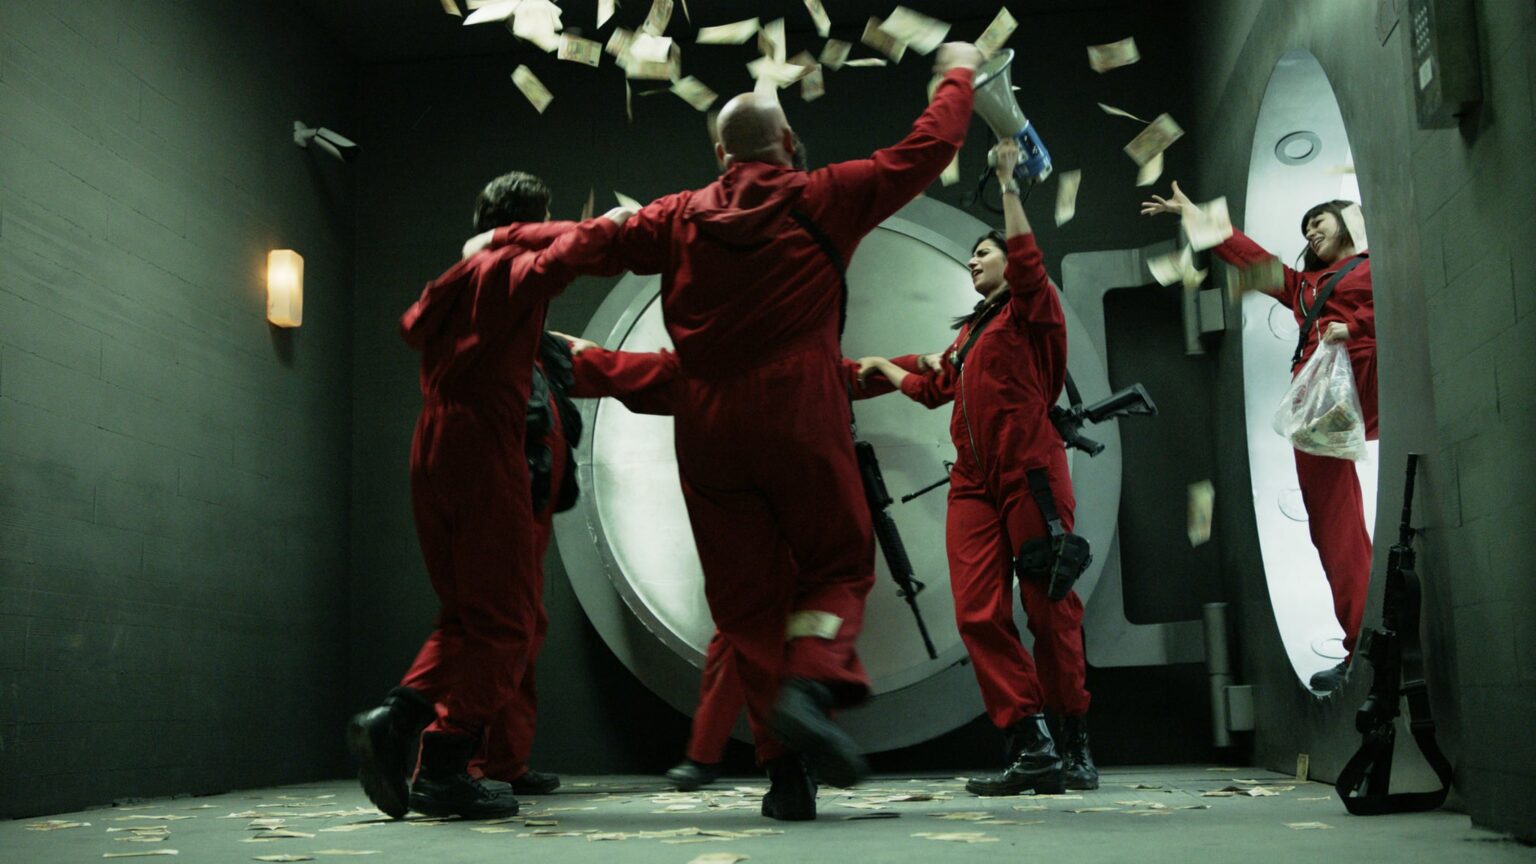 ‘Money Heist’ is gearing up for its finale. Here are some real heists that could inspire the action in season 5.